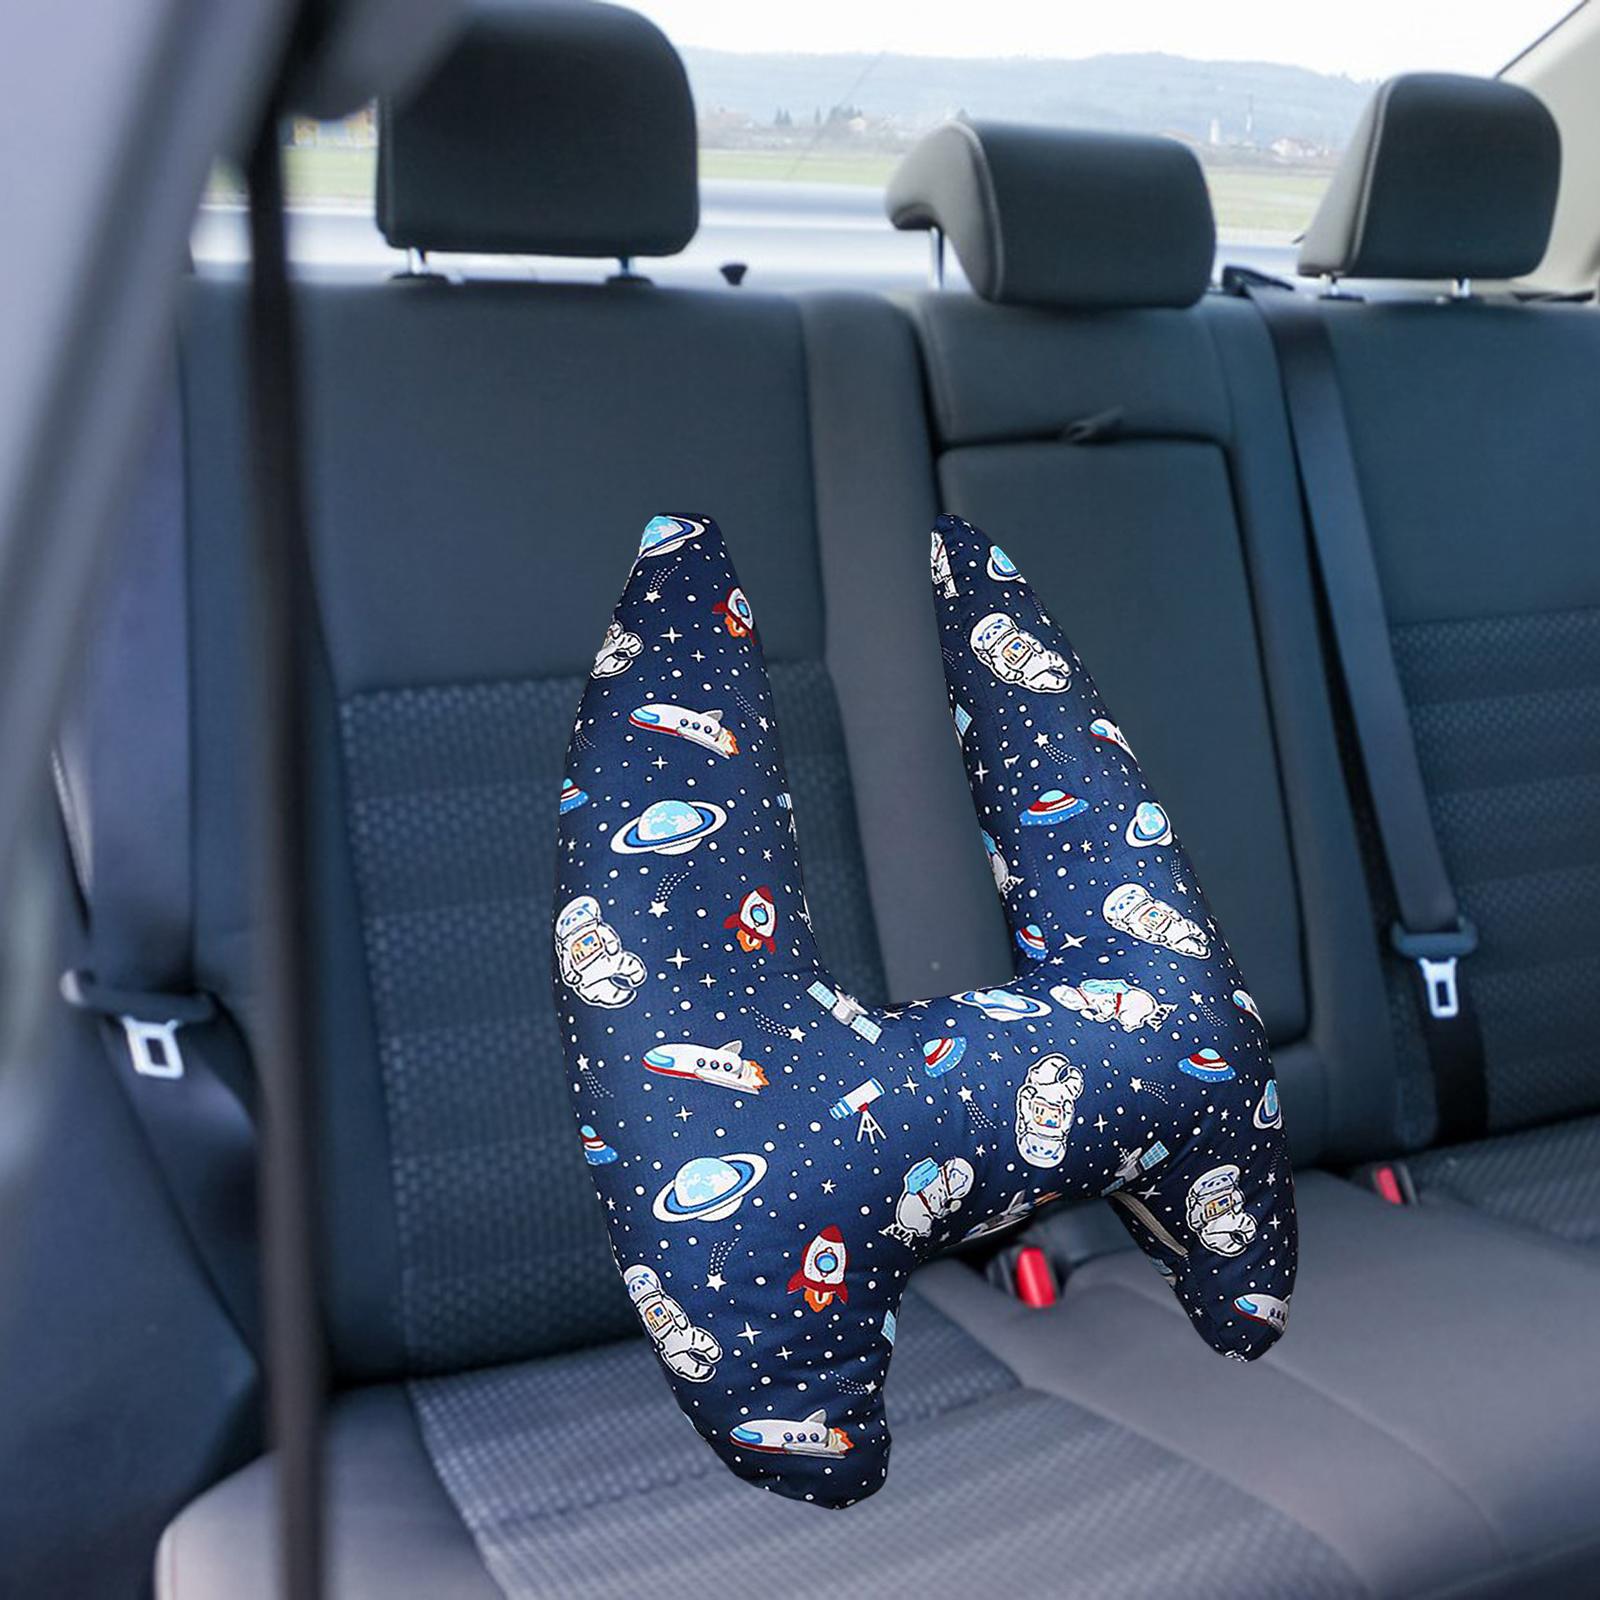 Car Back Seat Travel Pillow Provides Head and Body Support Sleeping Pillow Blue Astronaut